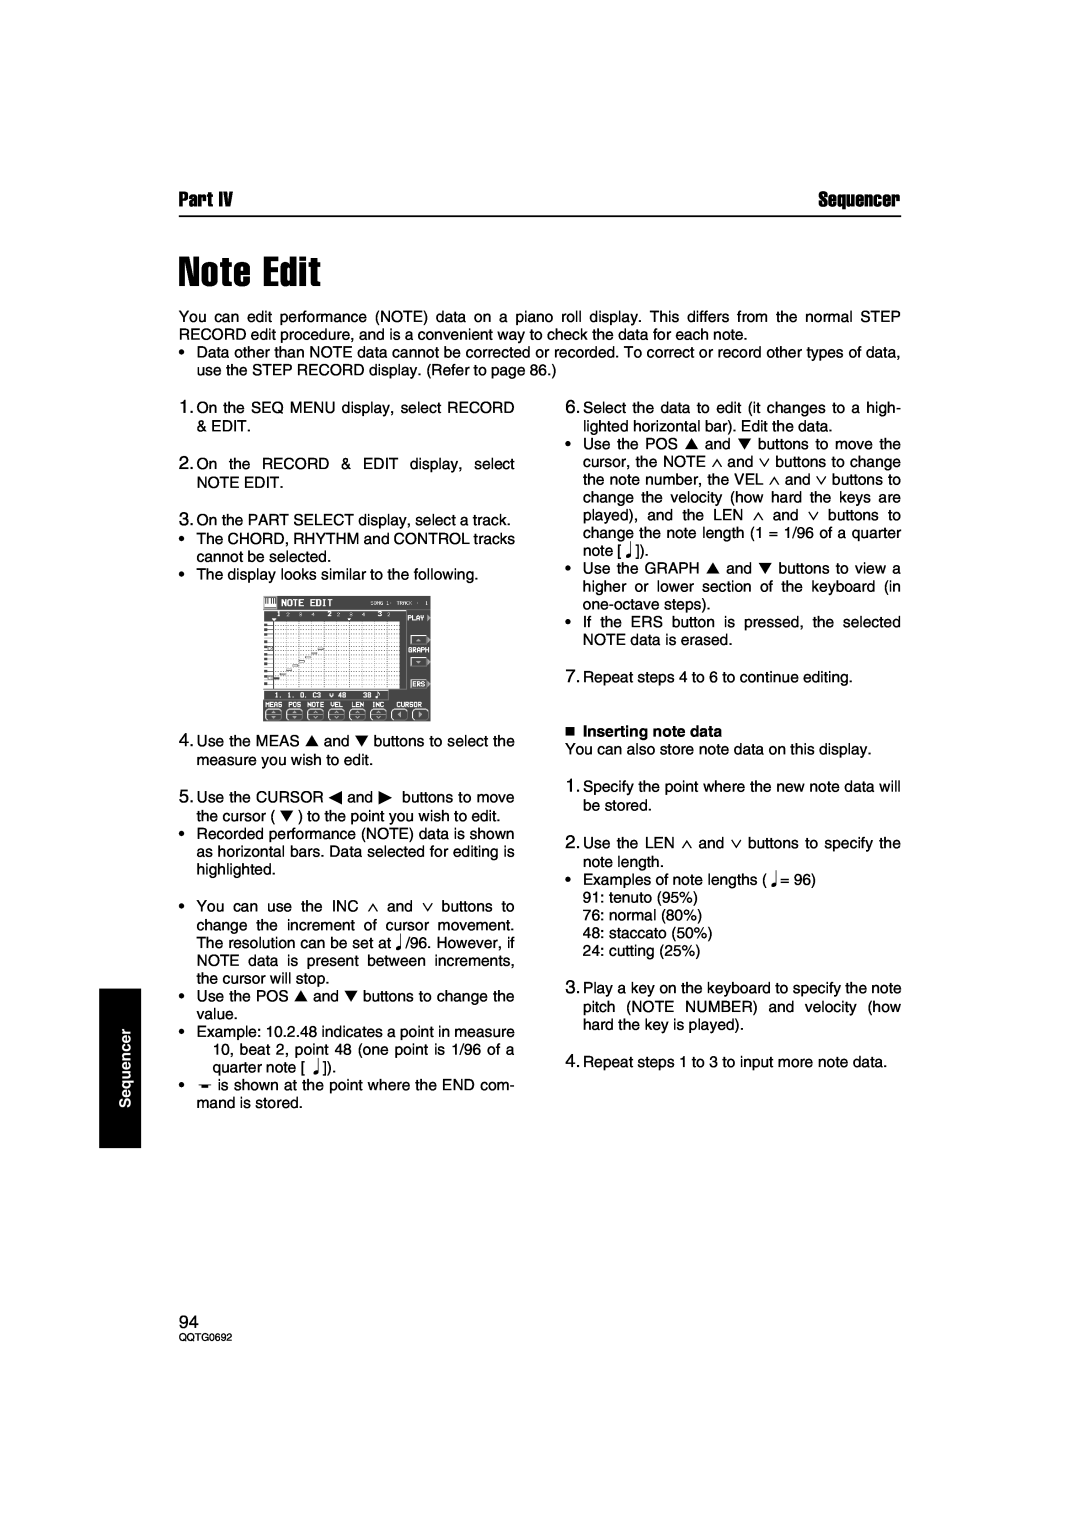 Panasonic SX-KN2600, SX-KN2400 manual Note Edit,  Inserting note data, Part, Sequencer 